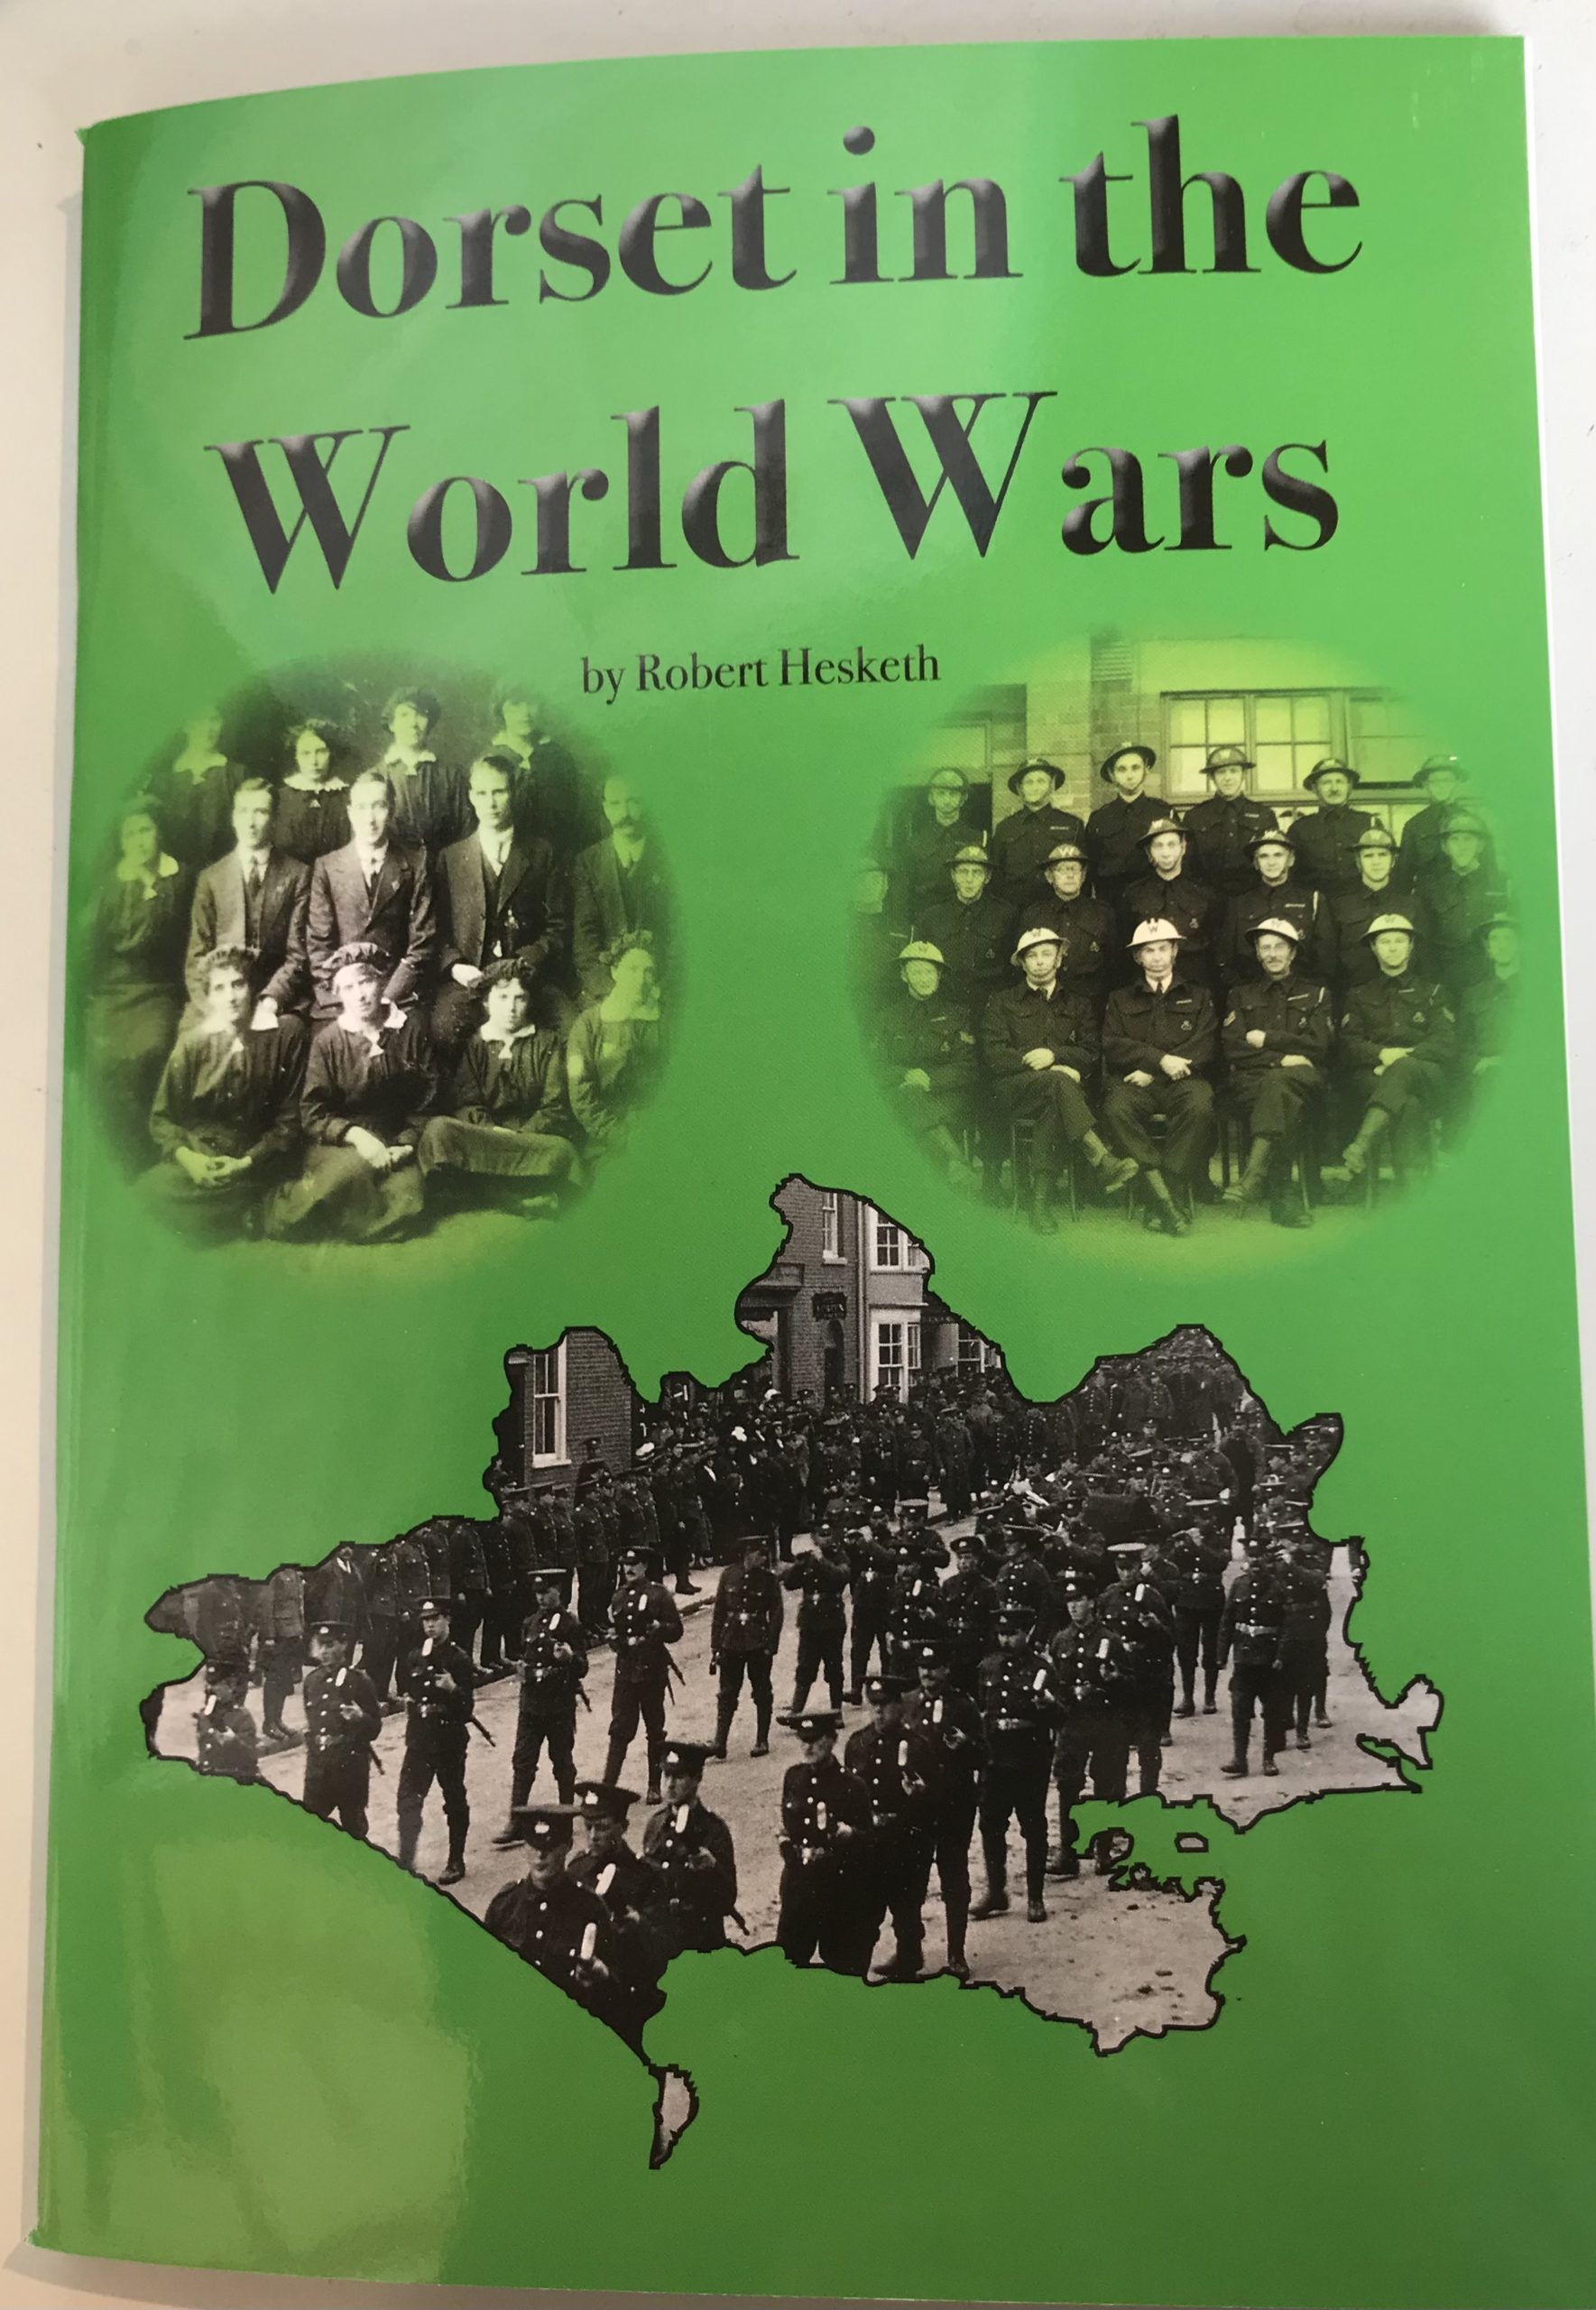 Published in 2019. Dorset in the World Wars by Robert Hesketh 